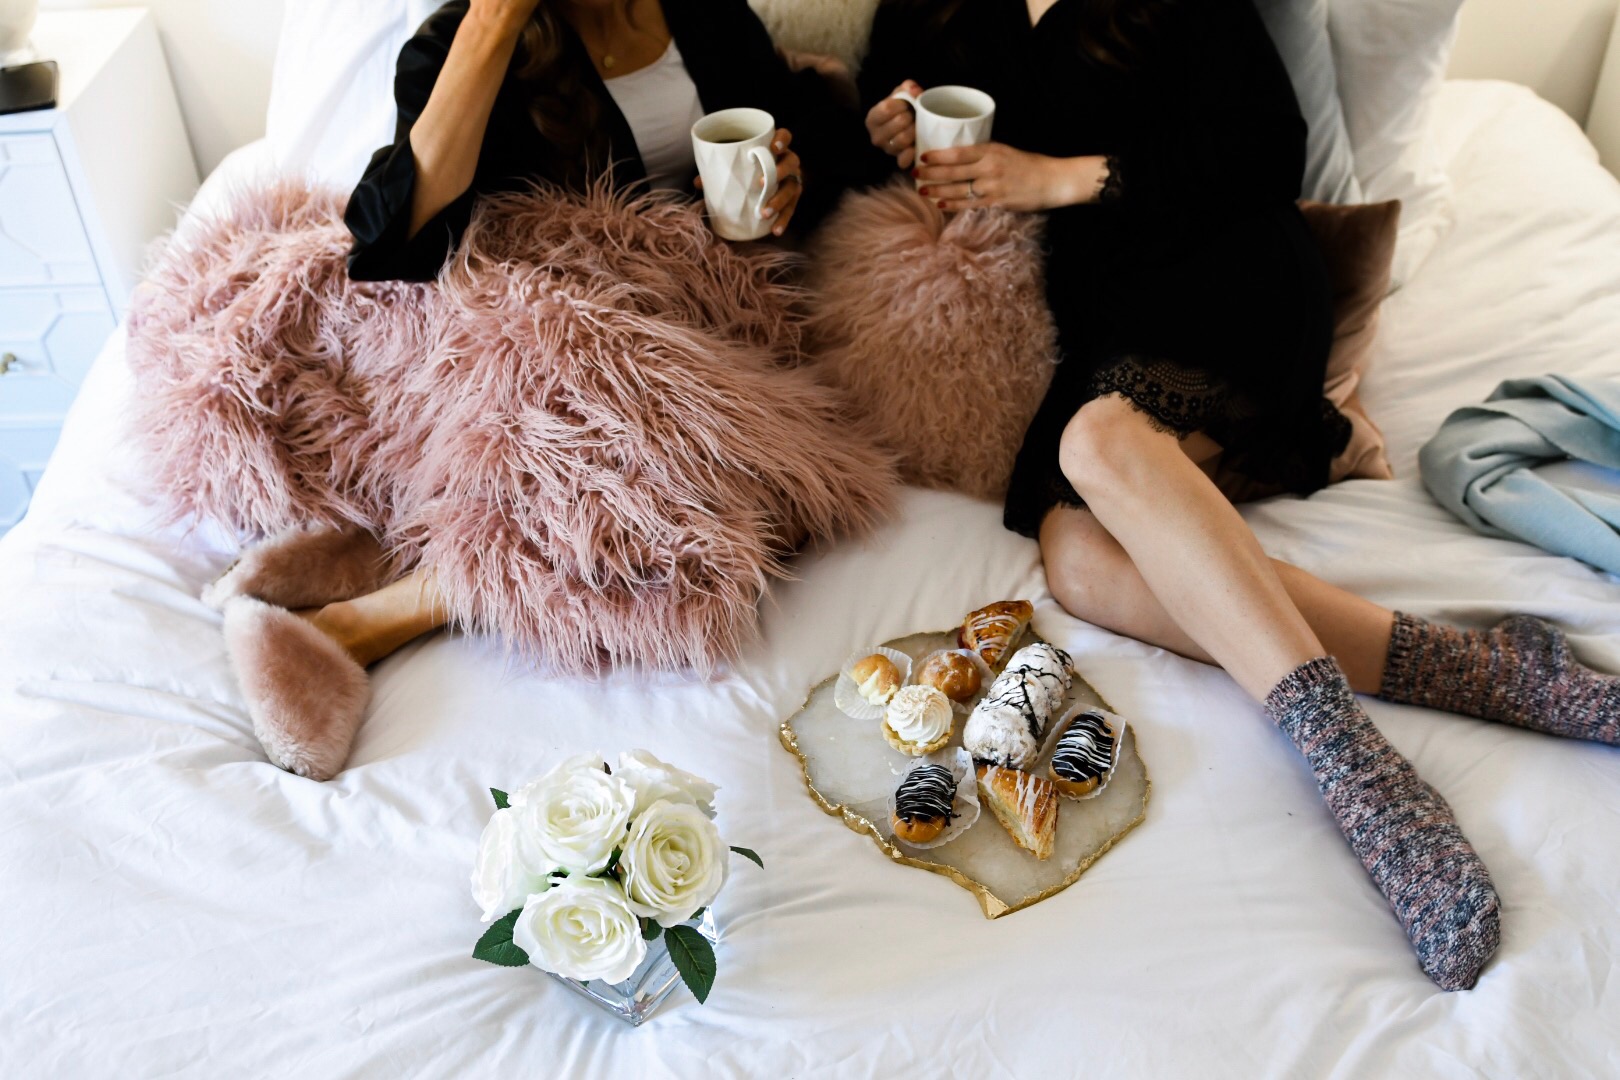 Girls' Night In With Valour Magazine Esther Santer Fashion Blog NYC Street Style Blogger Outfit OOTD Trendy Eishes Style Cozy Blanket Throw Pillows Flowers Desserts Pastries Black Robes Pink Fur Fuzzy Slippers Jcrew Adore  Me Socks Mugs Coffee Women.jpg